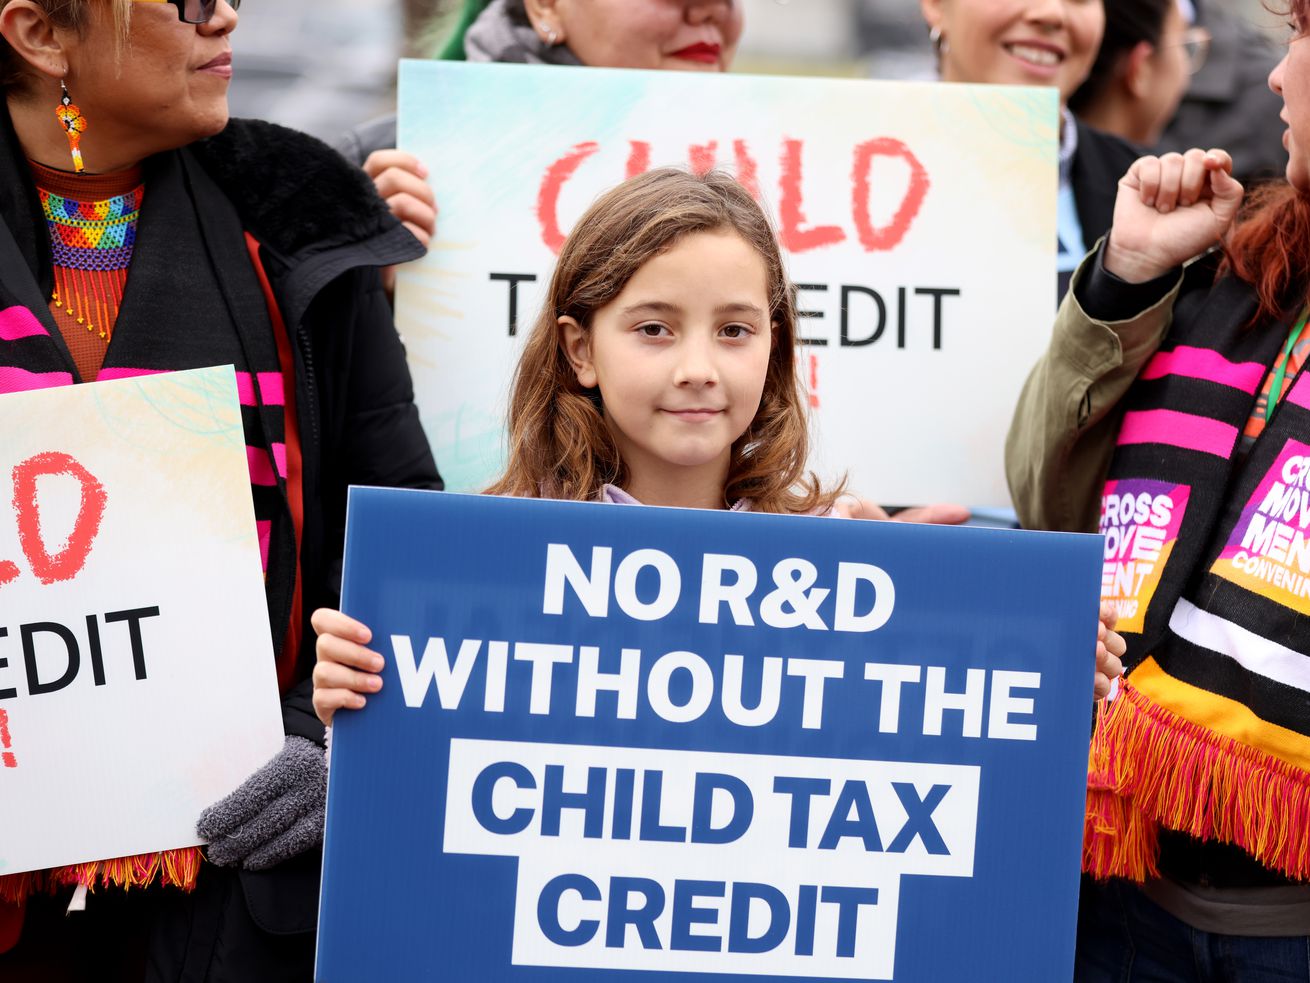 A child in a crowd holding up a sign that says NO R&amp;D WITHOUT THE CHILD TAX CREDIT.